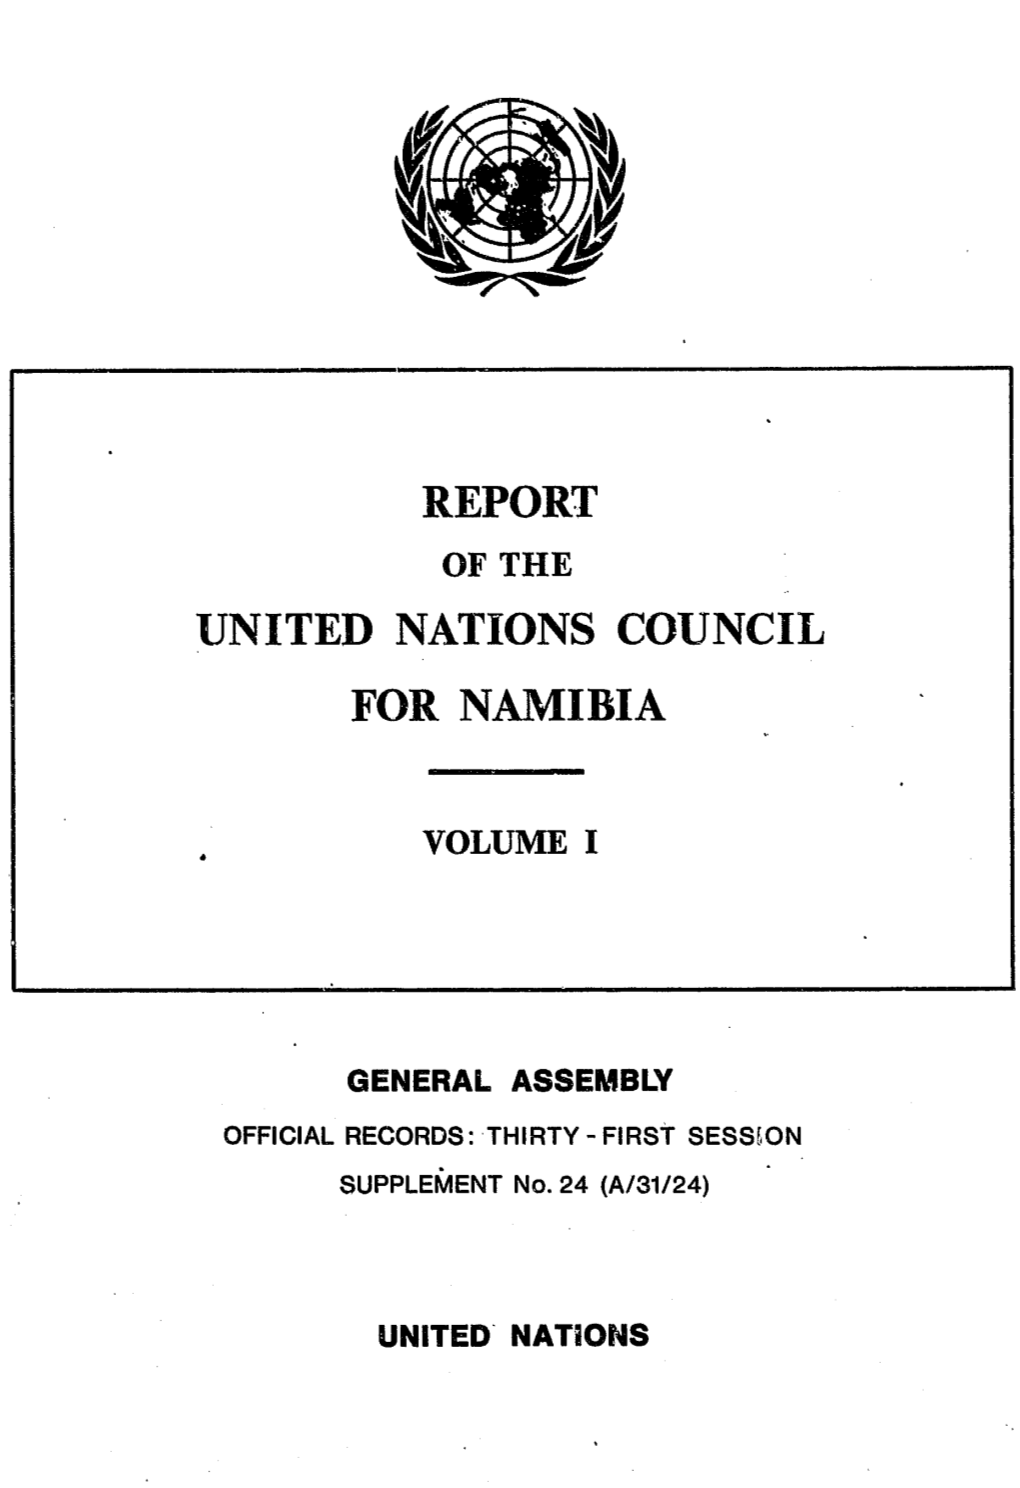 United Nations Council for Namibia